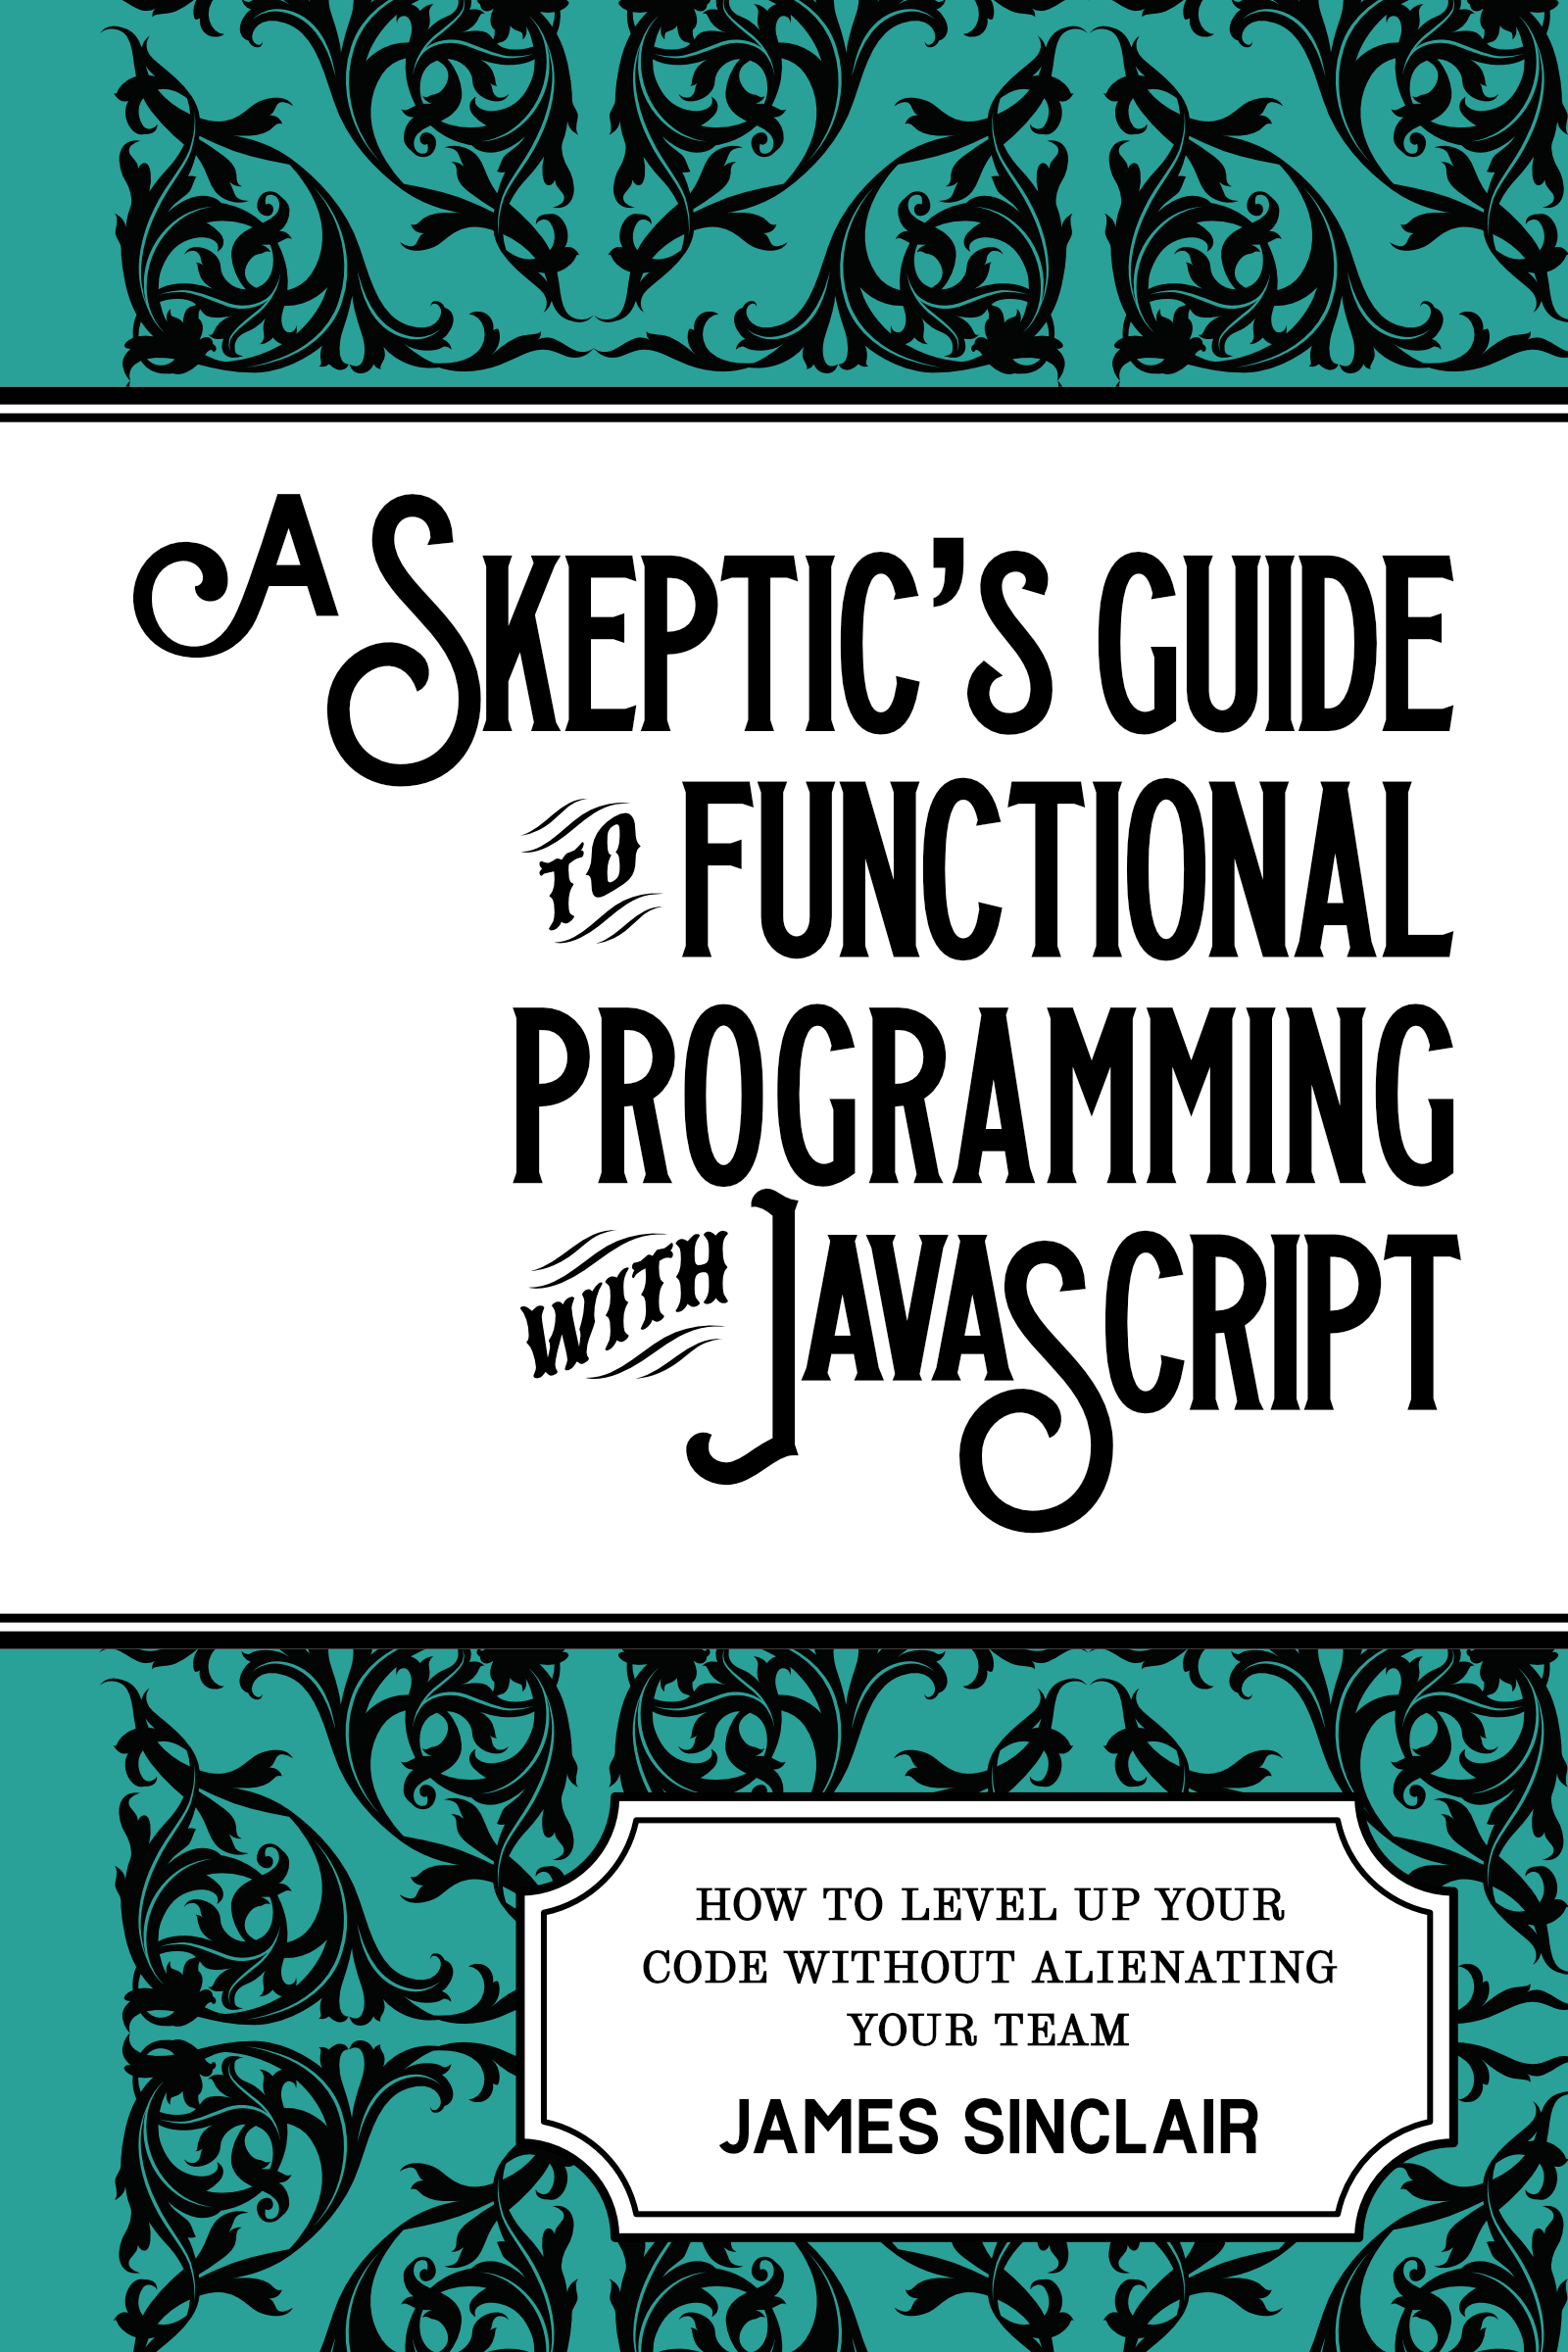 Cover artwork for ‘A skeptic’s guide to functional programming with JavaScript.’ The subtitle reads ‘How to level up your code without alienating your team.’ The author is James Sinclair.